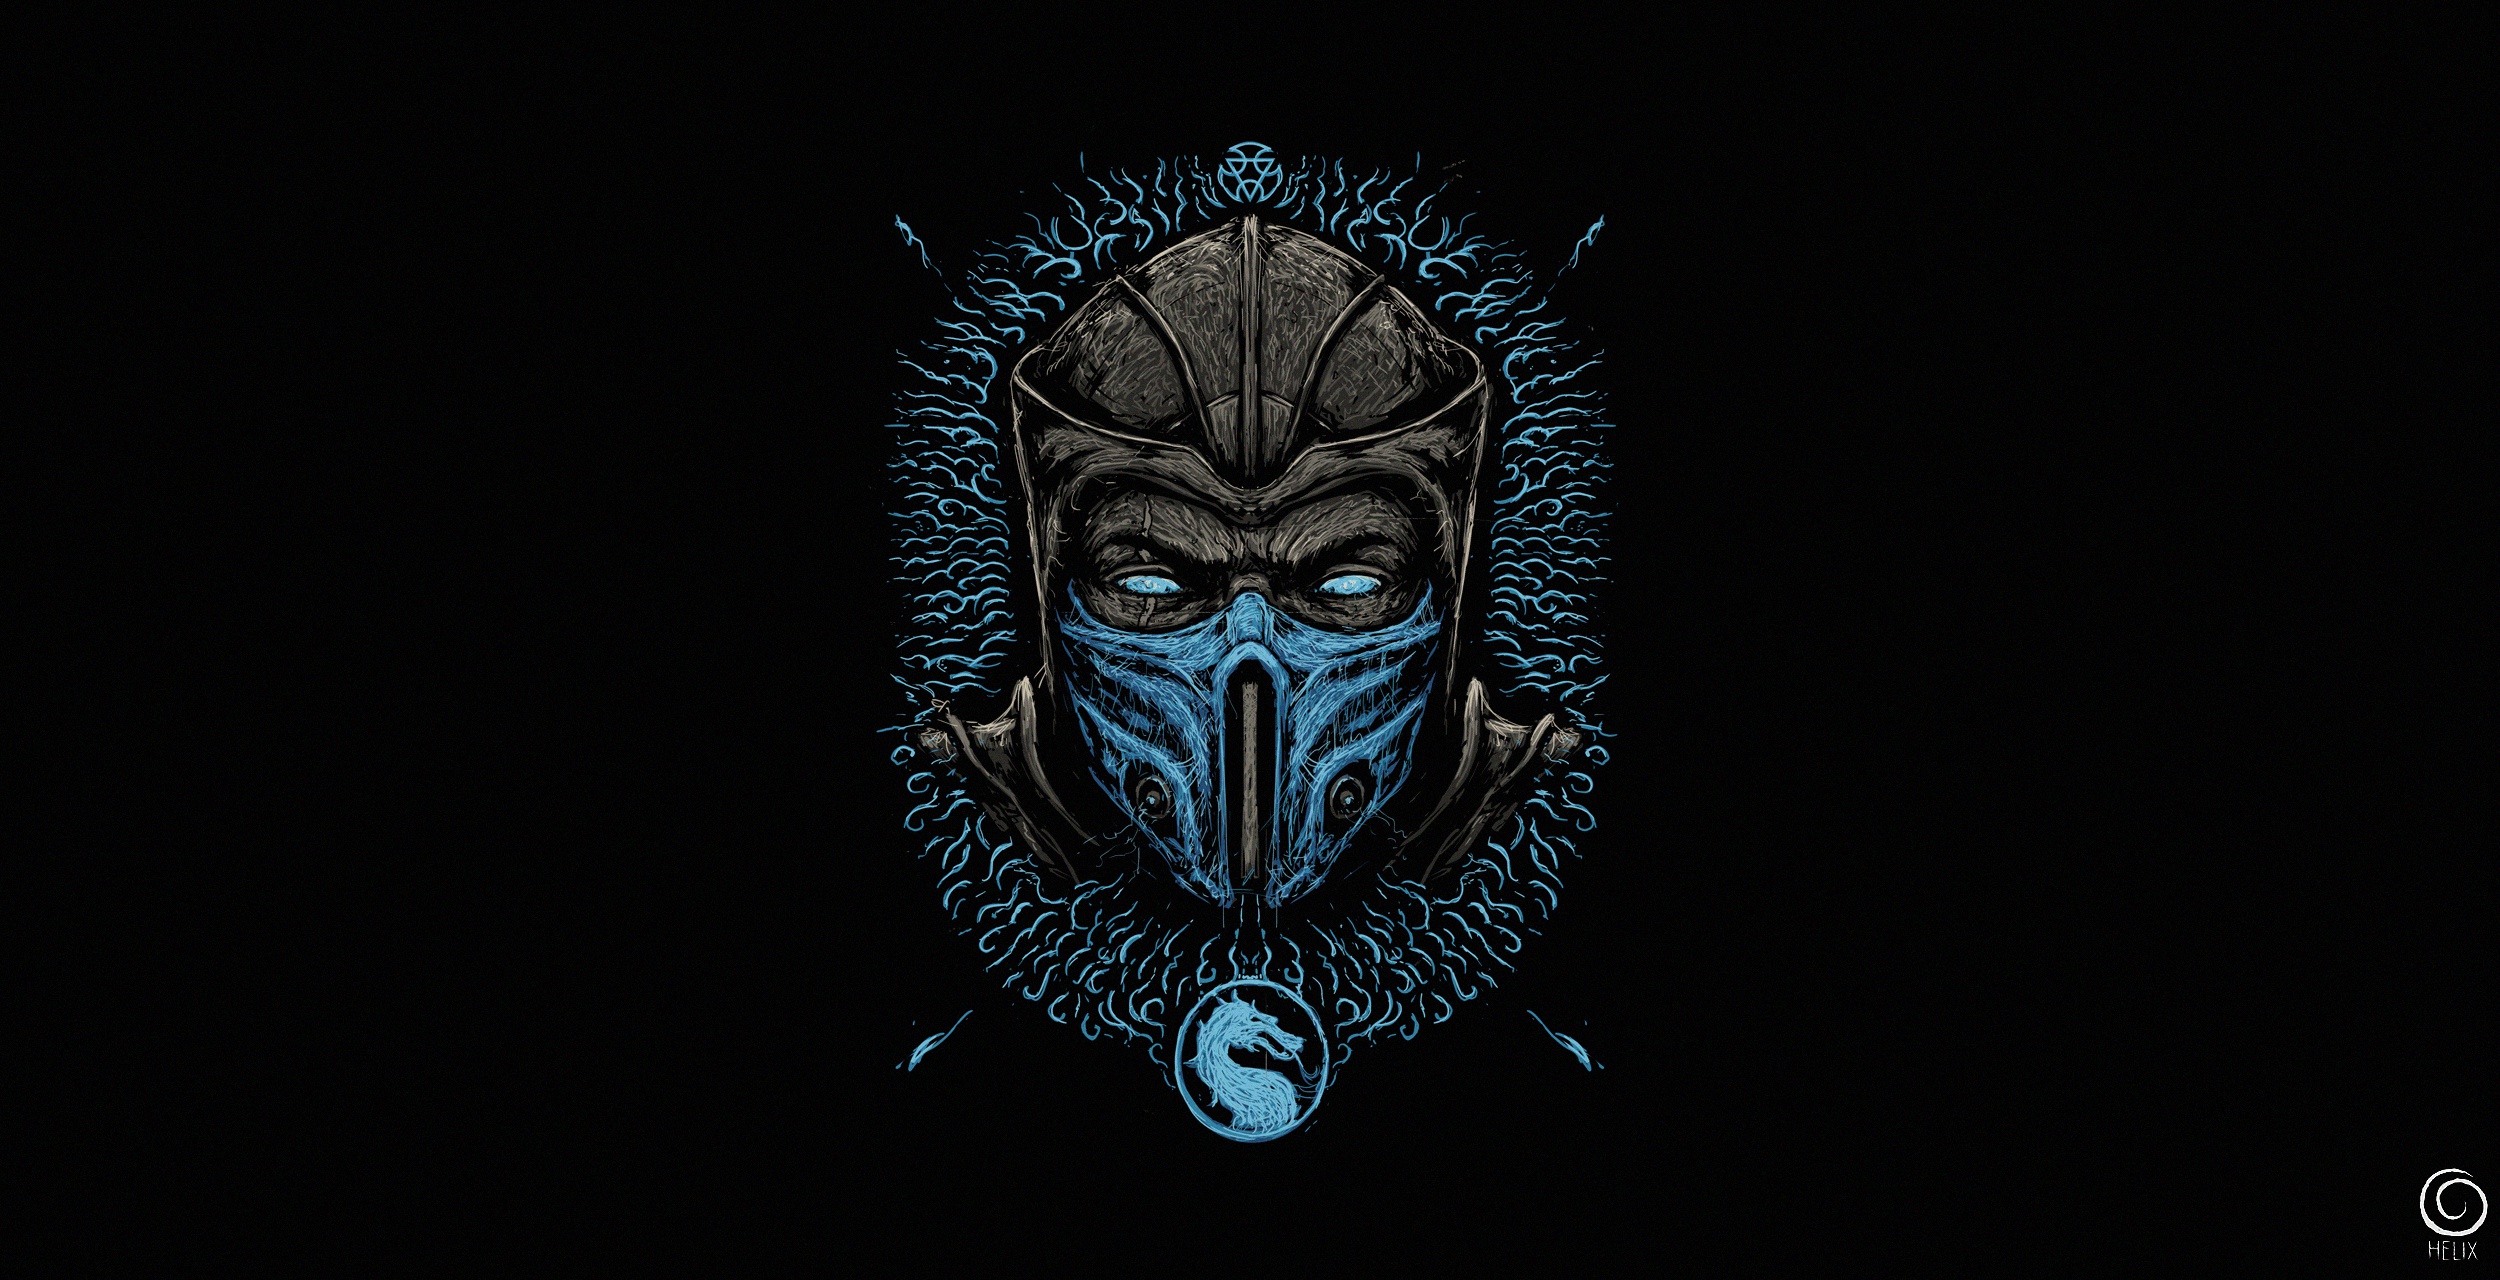 General 2500x1280 Mortal Kombat video games video game warriors video game art simple background Sub-Zero (Mortal Kombat) video game men black background mask video game characters